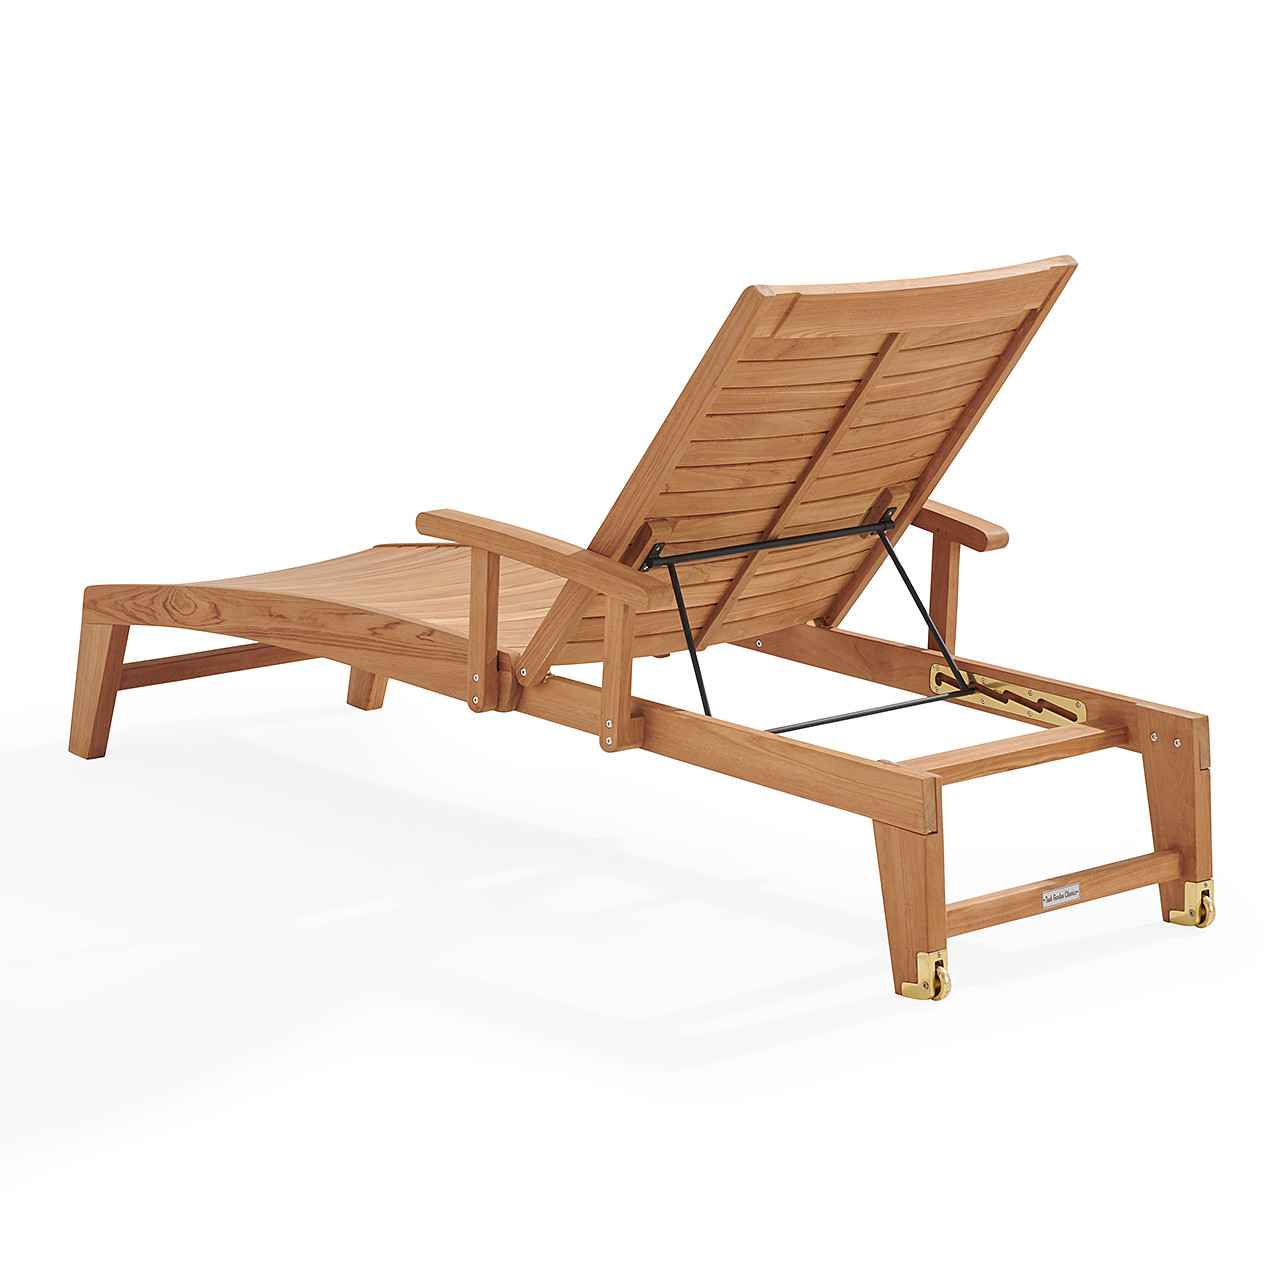 Pembroke Natural Stain Solid Teak With Cushion Chaise Lounge